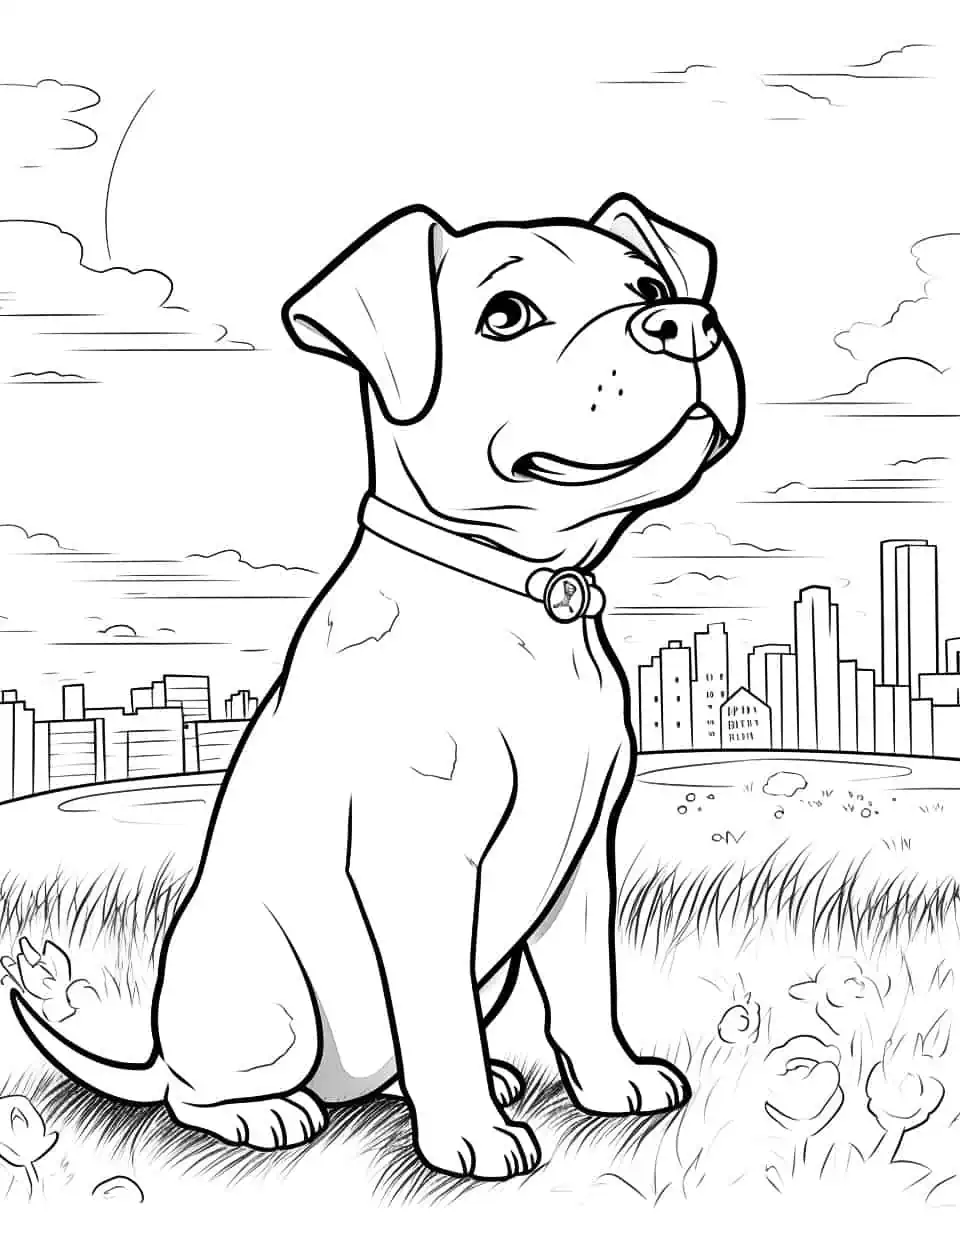 Pitbull and the Sunset Dog Coloring Page - A Pitbull sitting peacefully and watching the sunset in a park.